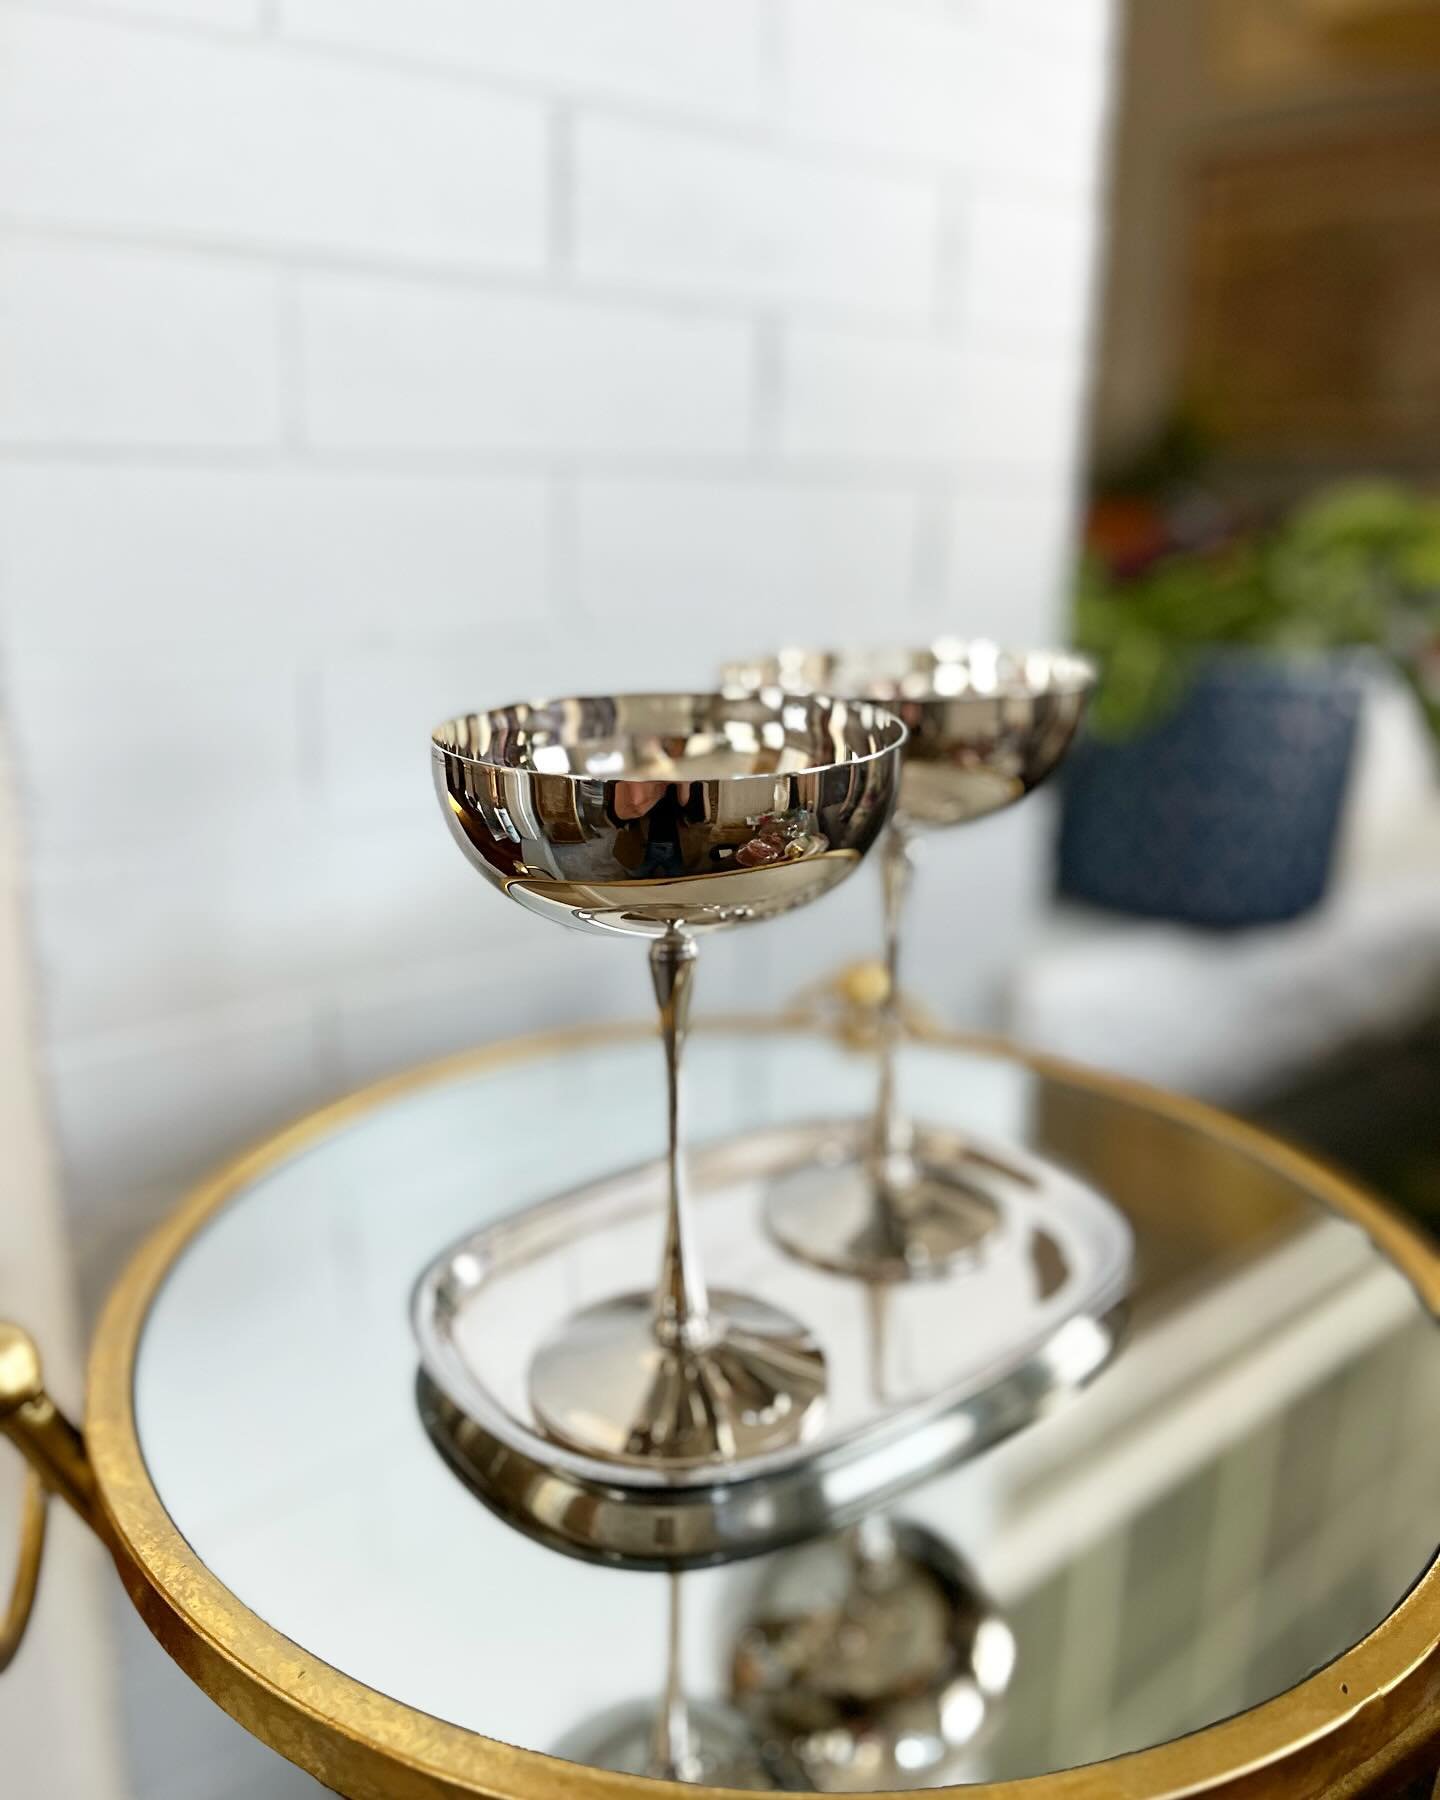 Just came across this lovely and romantic set of Leonard Silverplate Champagne Coupes! 

Available for $40
Silverplate Trey: $20

Vintage items are pre-owned and may show signs of age, love, and character.

- Comment SOLD on item or DM to purchase. 
